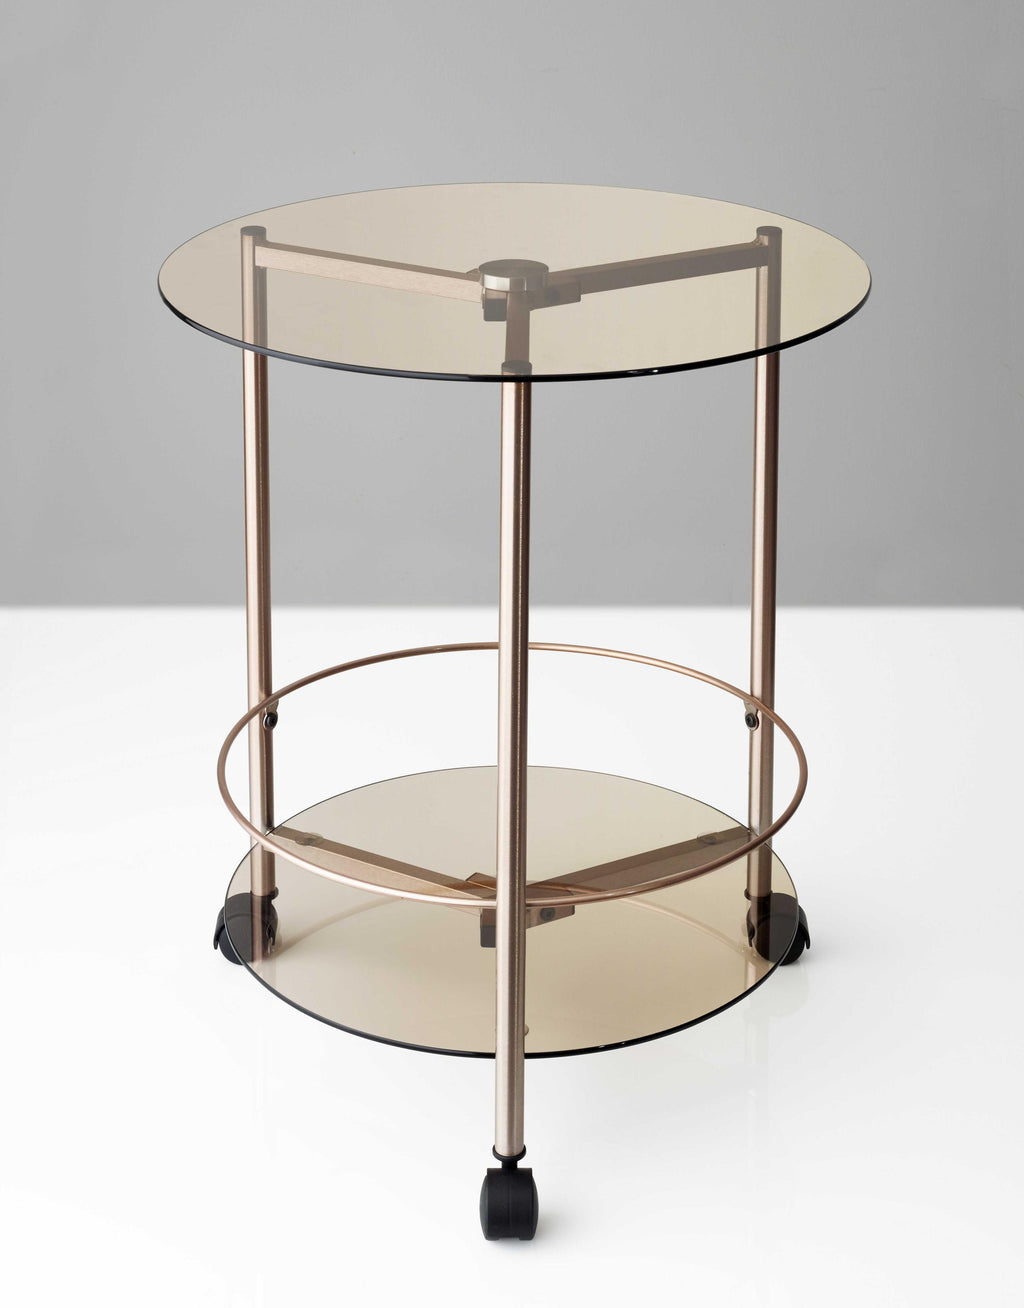 24" X 23.5" Copper 3 Wheels on Base Rolling End Table